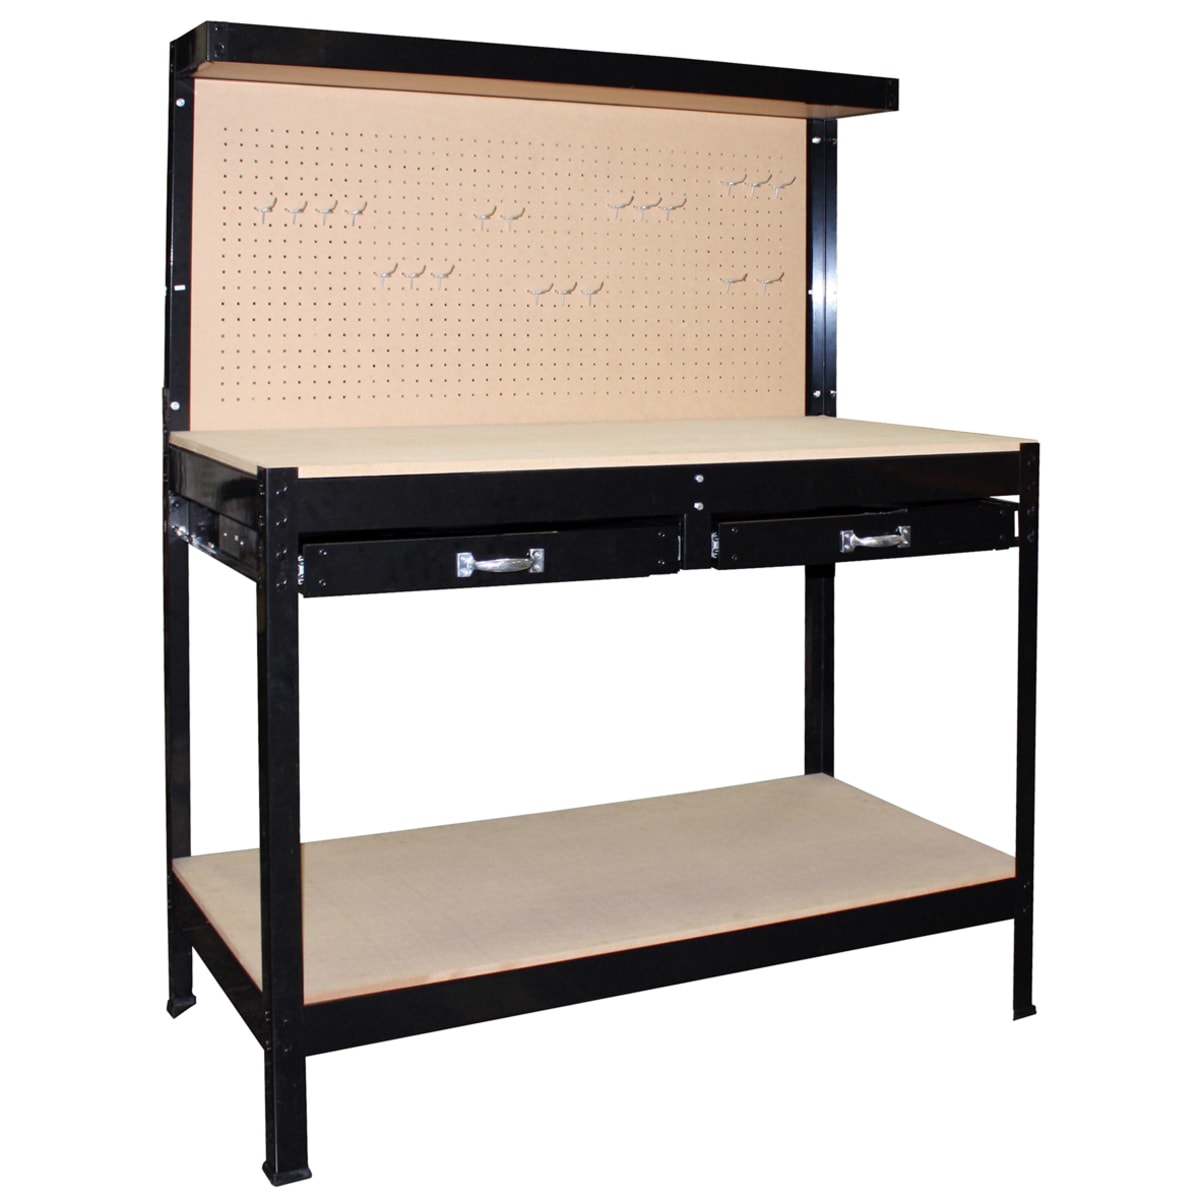 WORK DESK WITH 2 DRAWERS SIZES 122x61x151